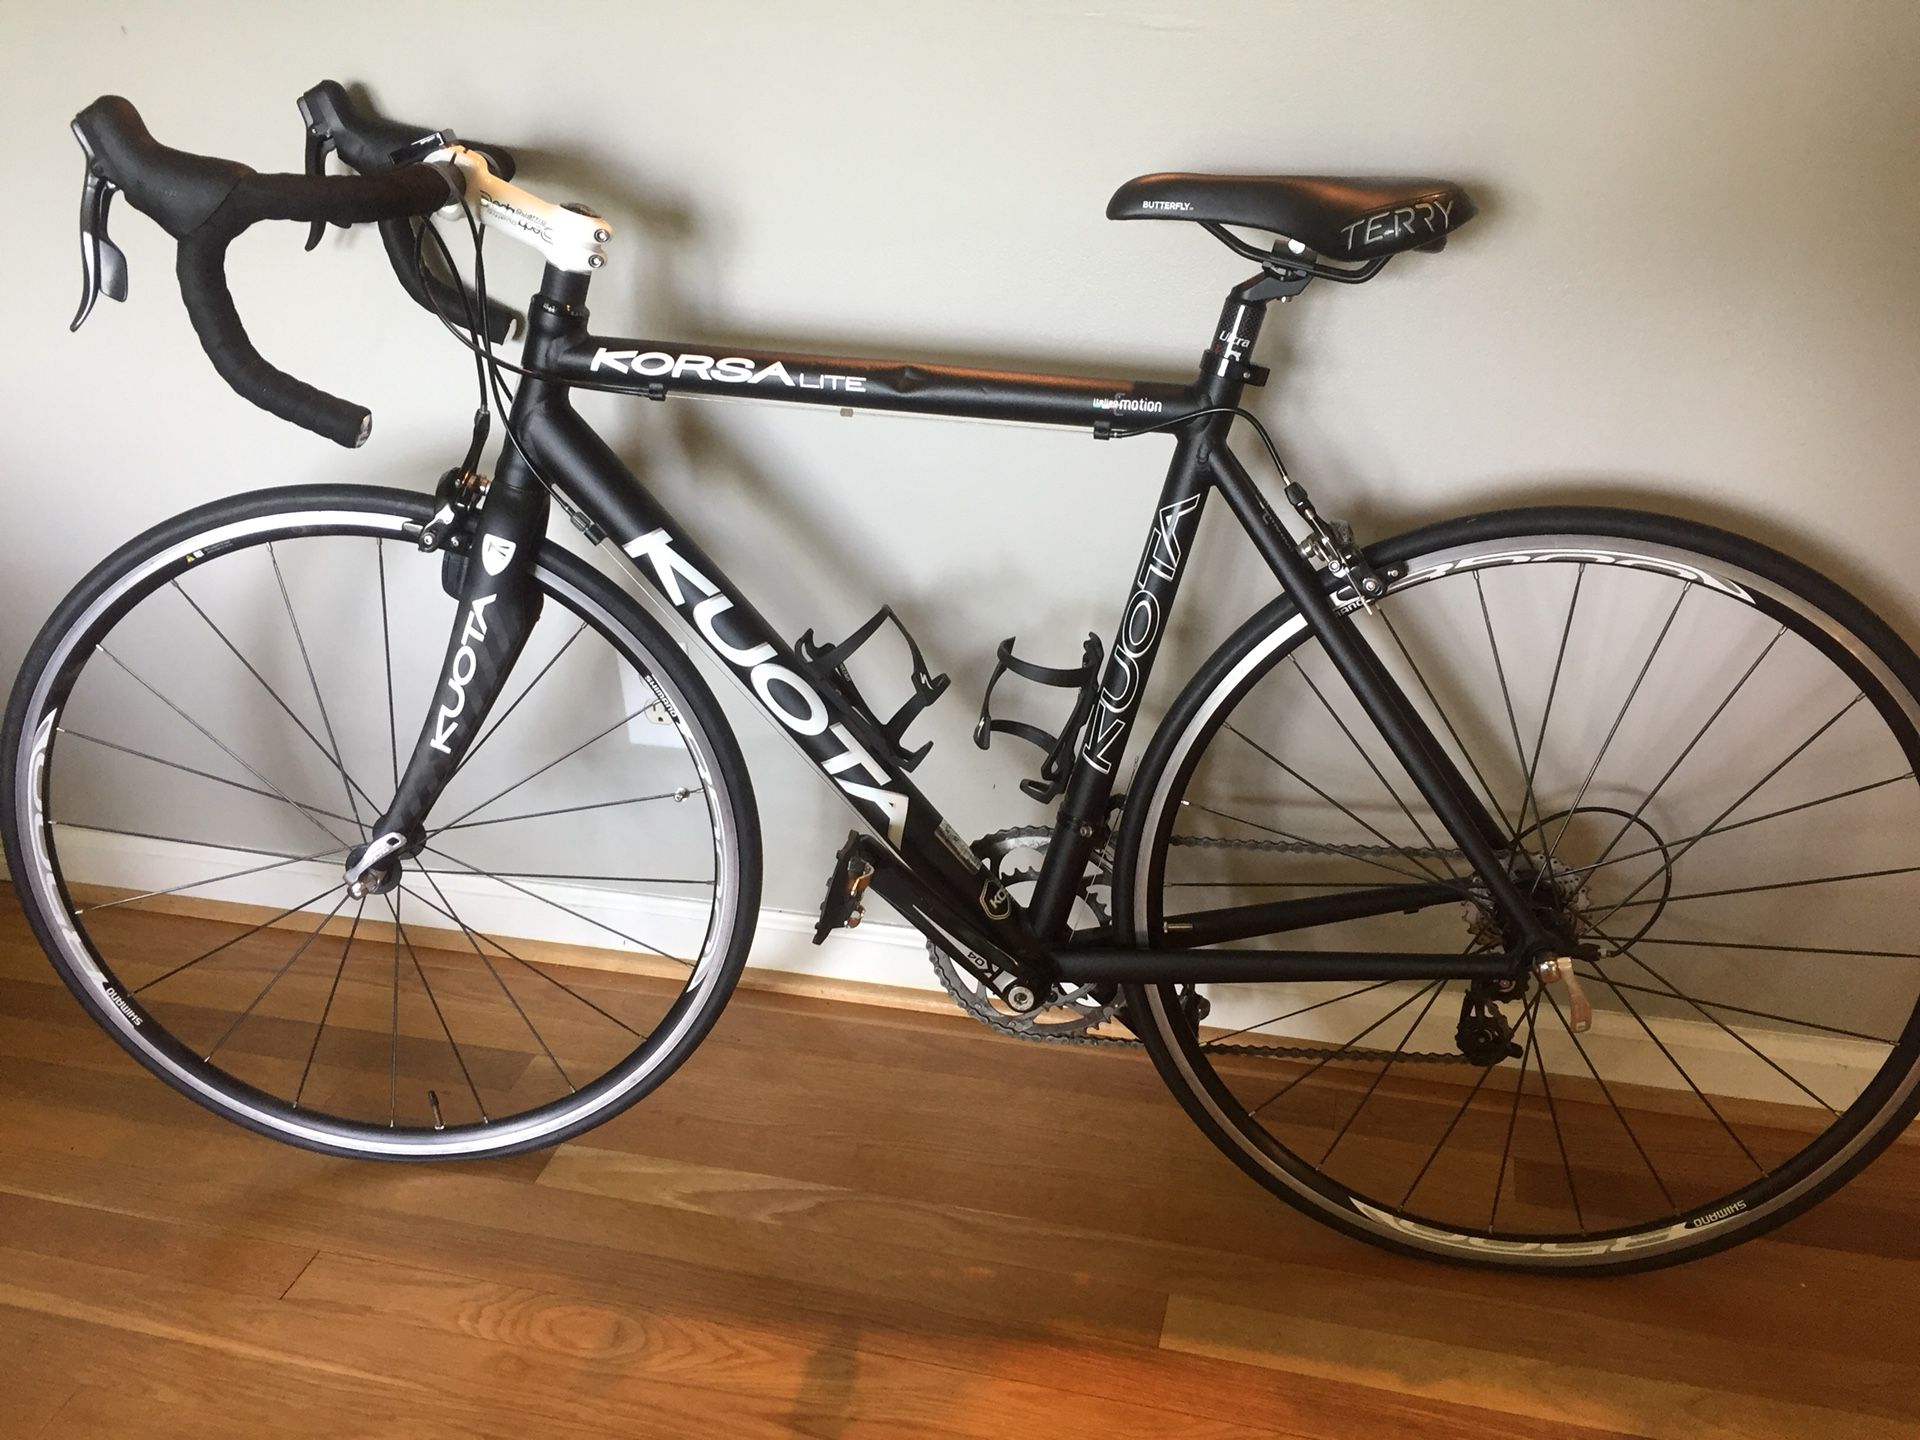 Kuota Korsa Lite road bicycle for Sale in Lexington, KY - OfferUp